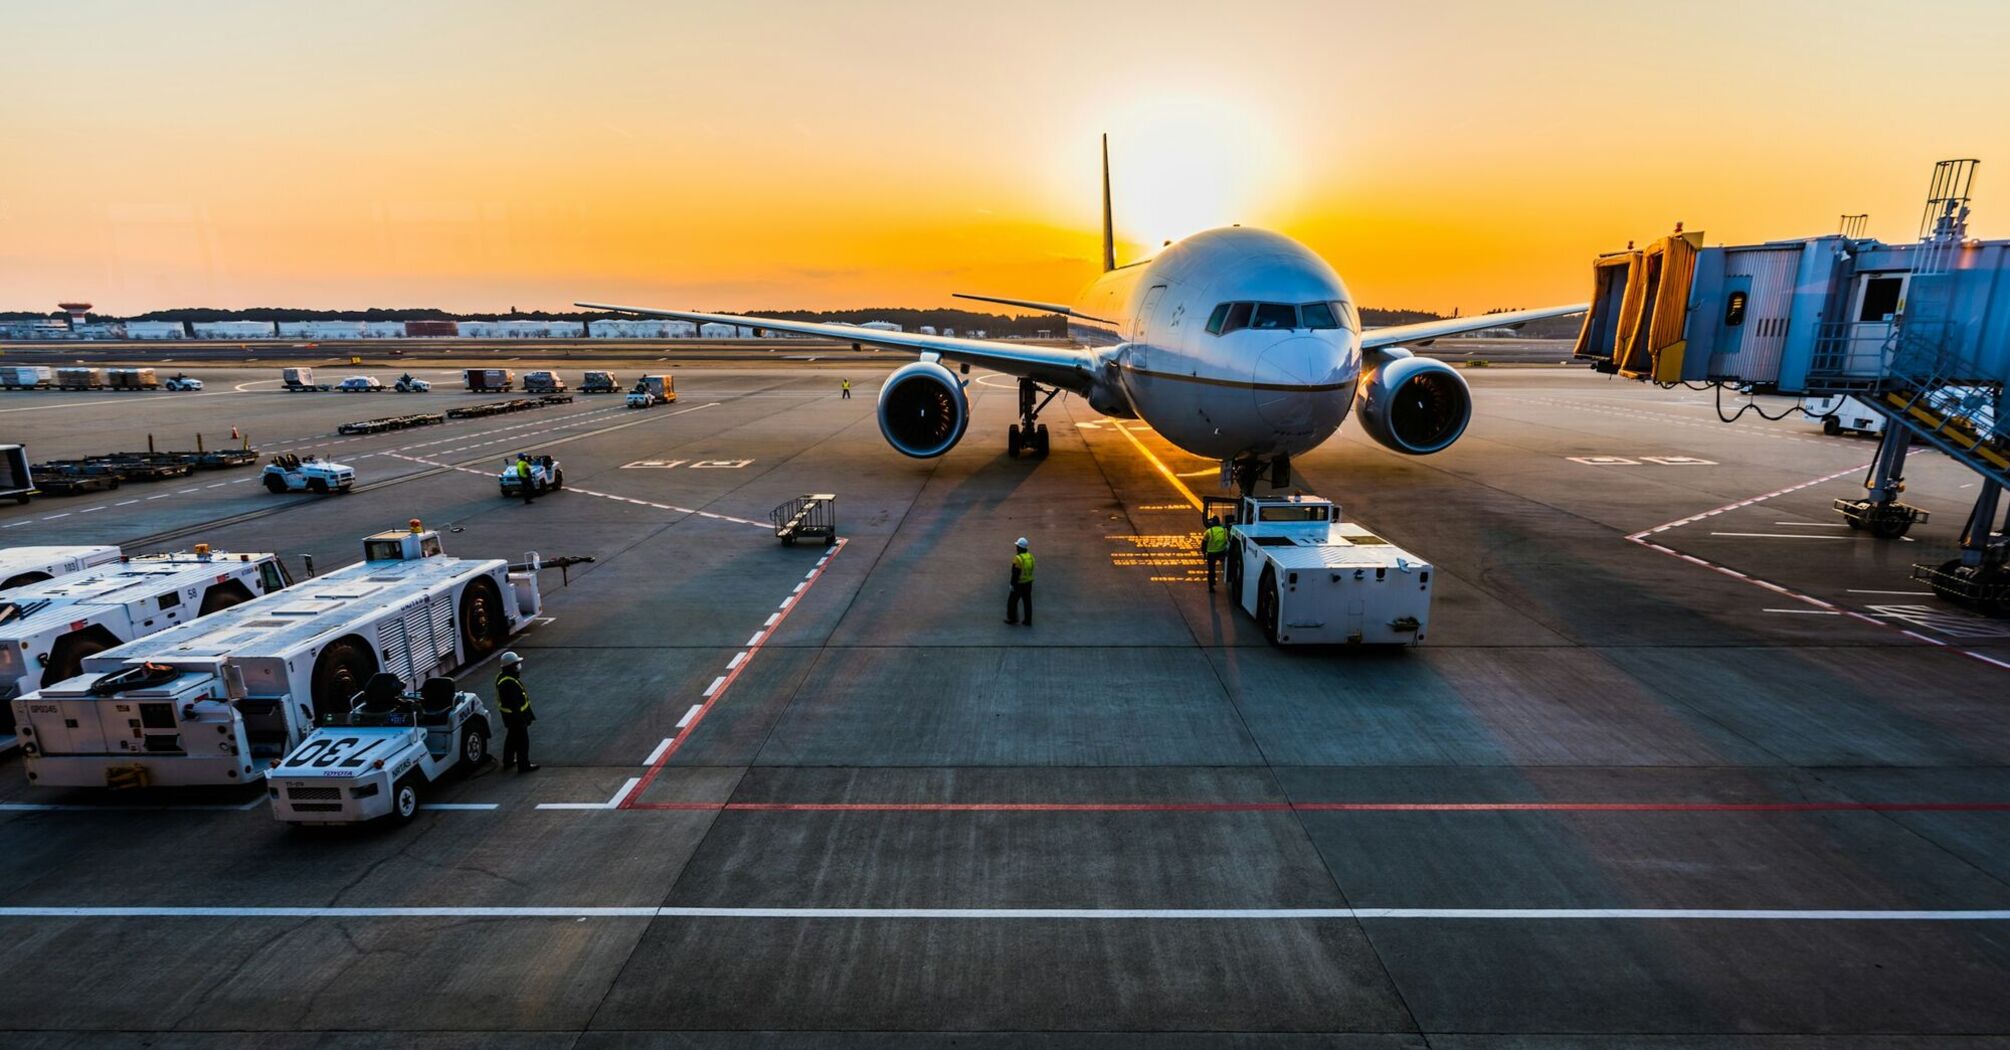 Airplane at airport gate during sunset with ground crew and equipment